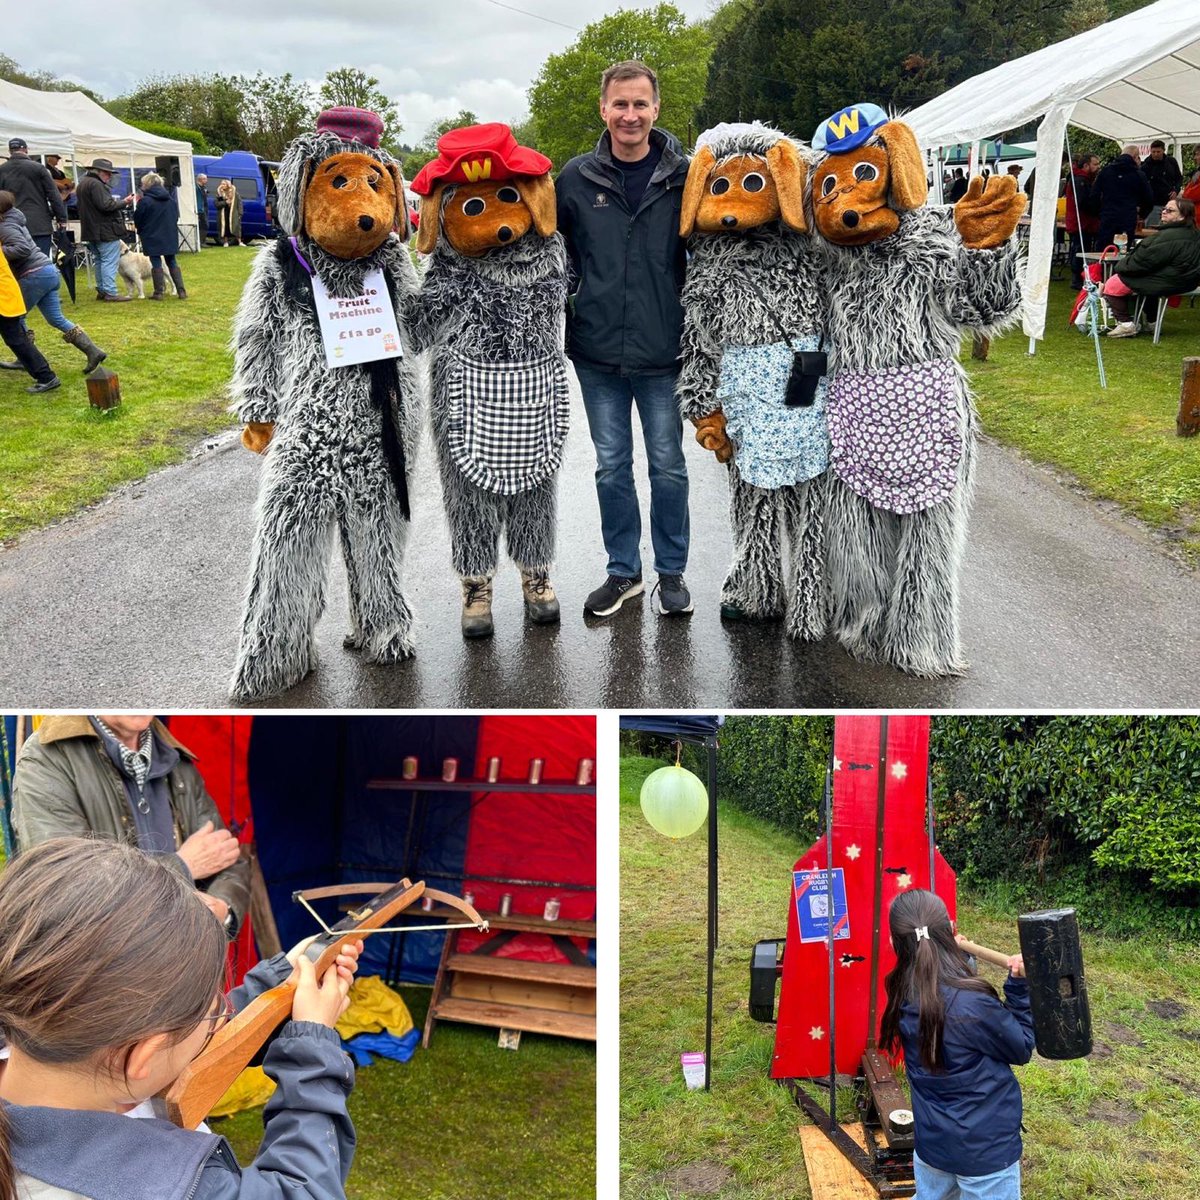 Brilliant afternoon yesterday at…wait for it…the 50th anniversary of the Blackheath Fete. Absolutely brilliant, nothing commercial, everything £1 a go, I couldn’t keep my screen-obsessed kids away from all the fun!